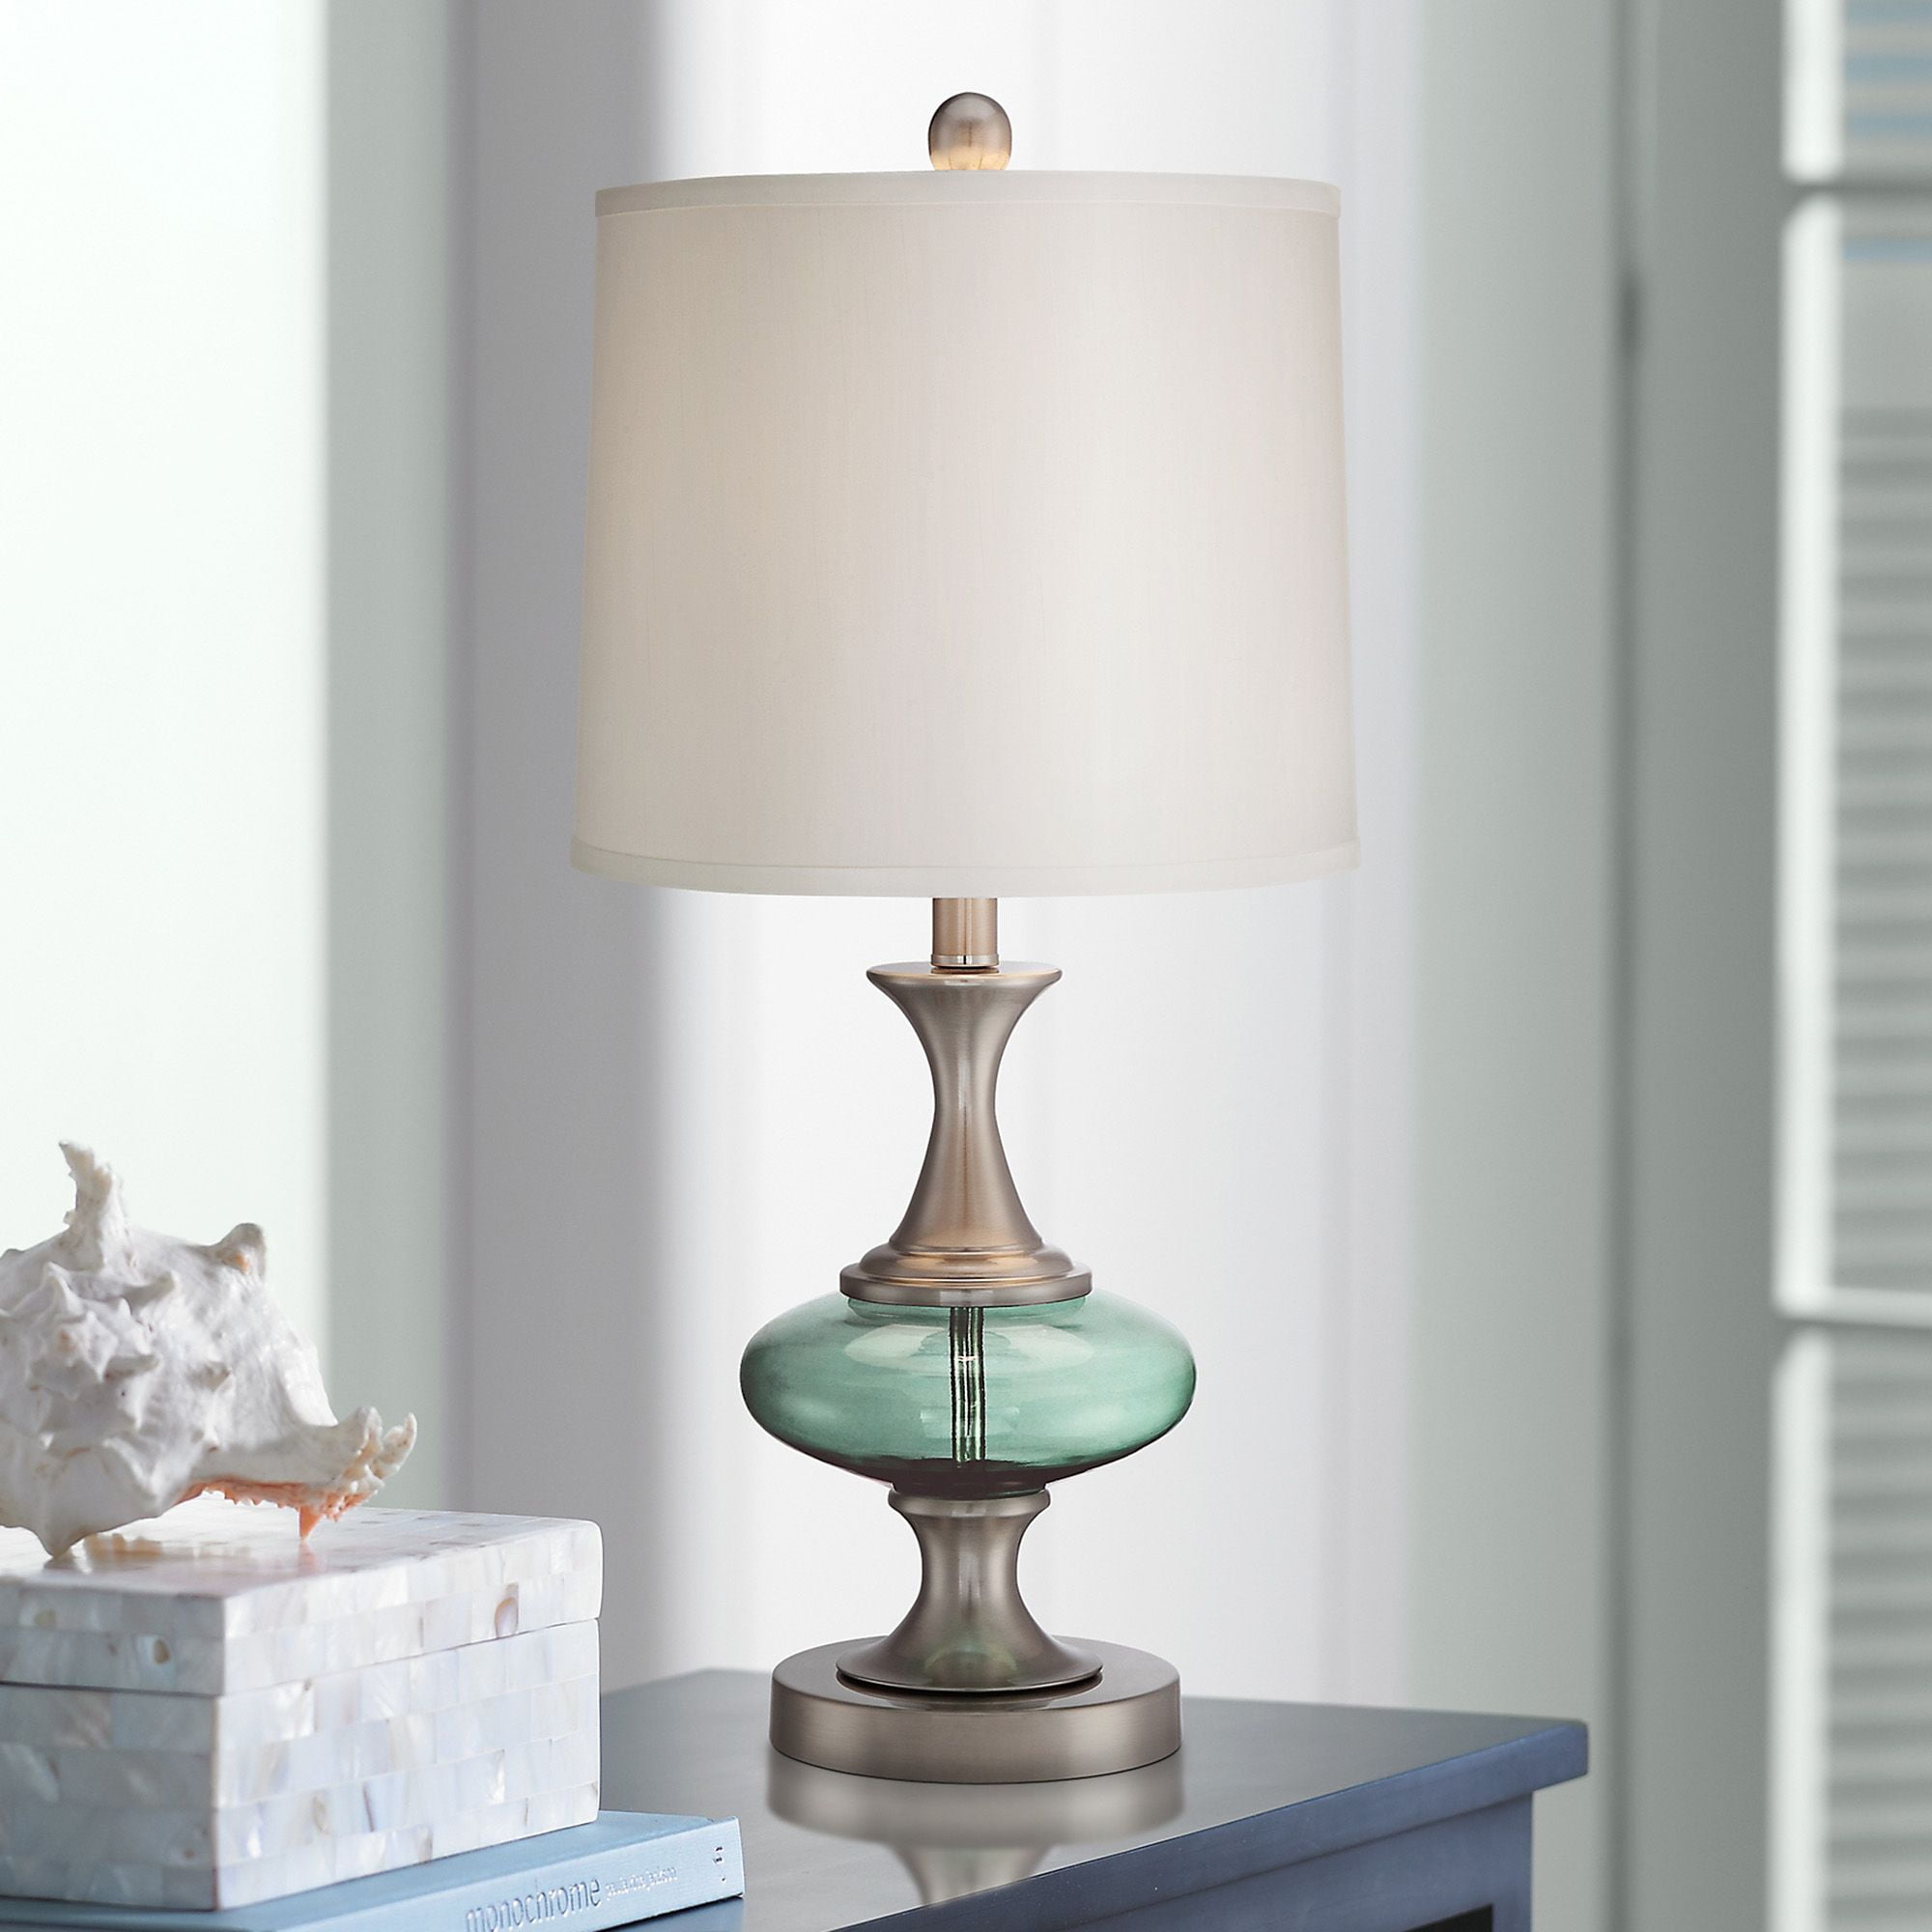 360 Lighting Modern Accent Table Lamp, Light Green Table Lamp Shade